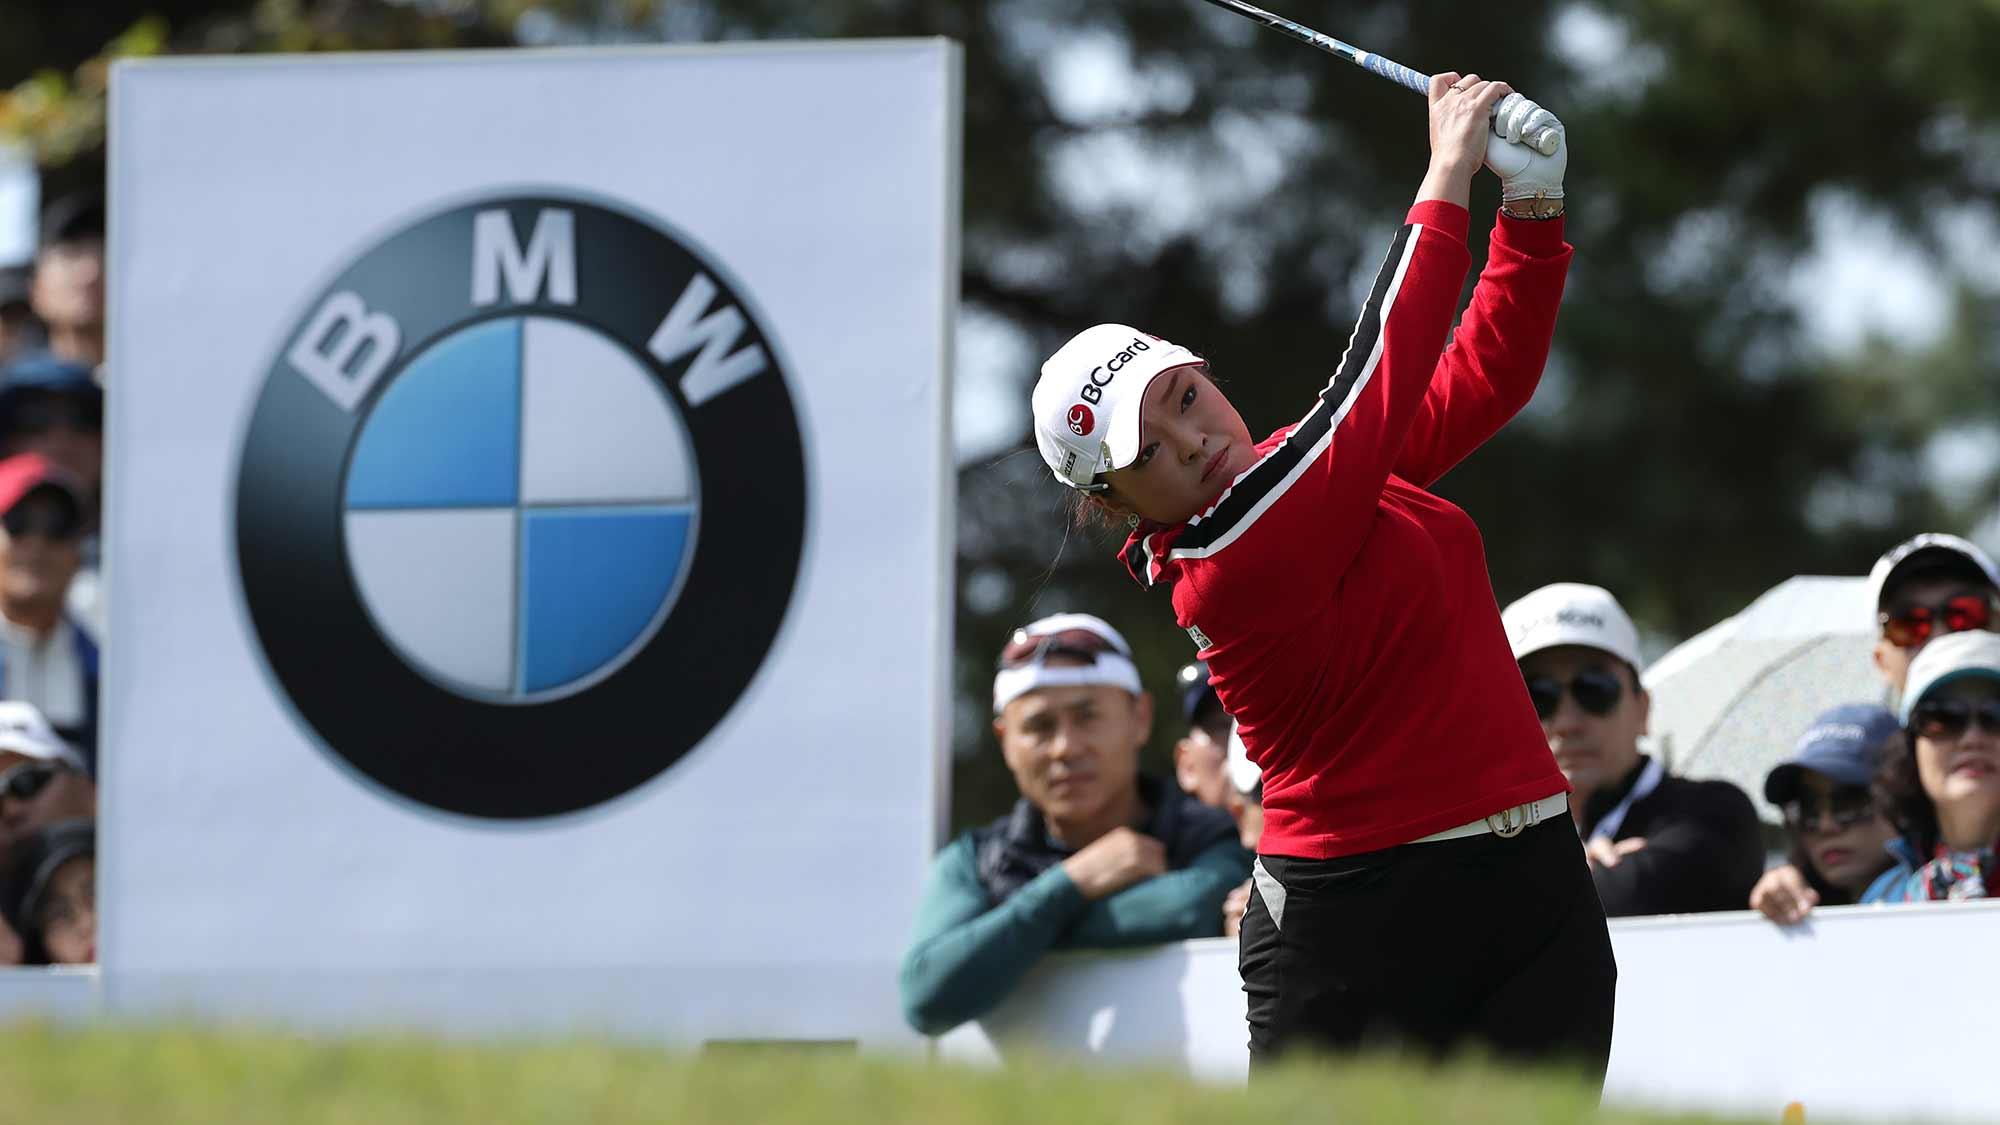 Ha Na Jang of Republic of Korea drives from a tee on the fifth hole during the final Round of 2019 BMW Ladies Championship at LPGA International Busan on October 27, 2019 in Busan, Republic of Korea